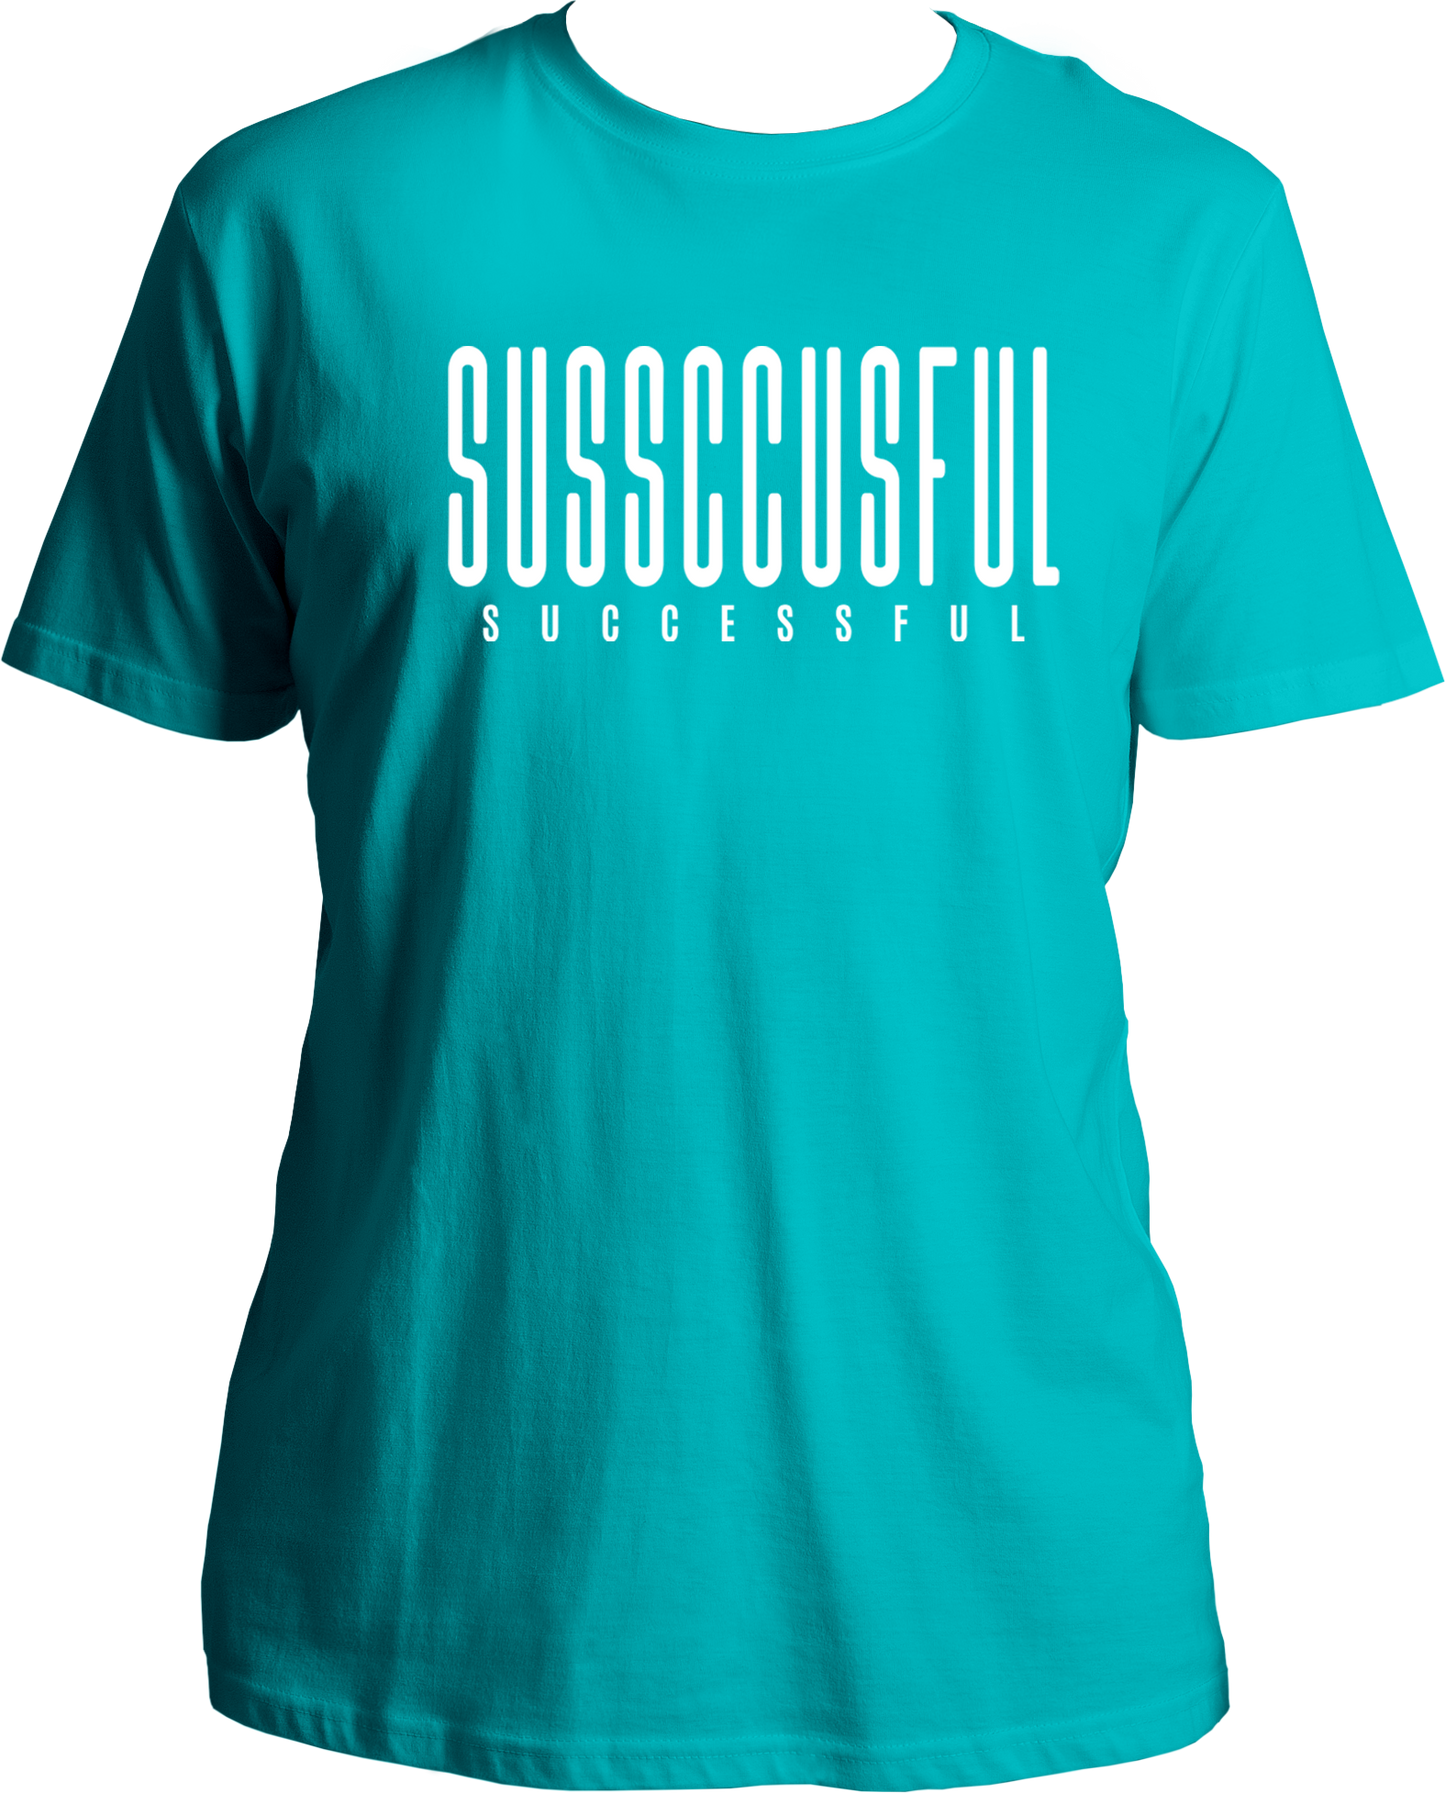 "Be the trend with Garrari's Sussccusful Unisex T-Shirts! Made with 100% pure cotton, these funny and funky tees are perfect for creating viral reels with the viral audio. Order now and join the fun!" #bageshwardham #bageshwardhamsarkar